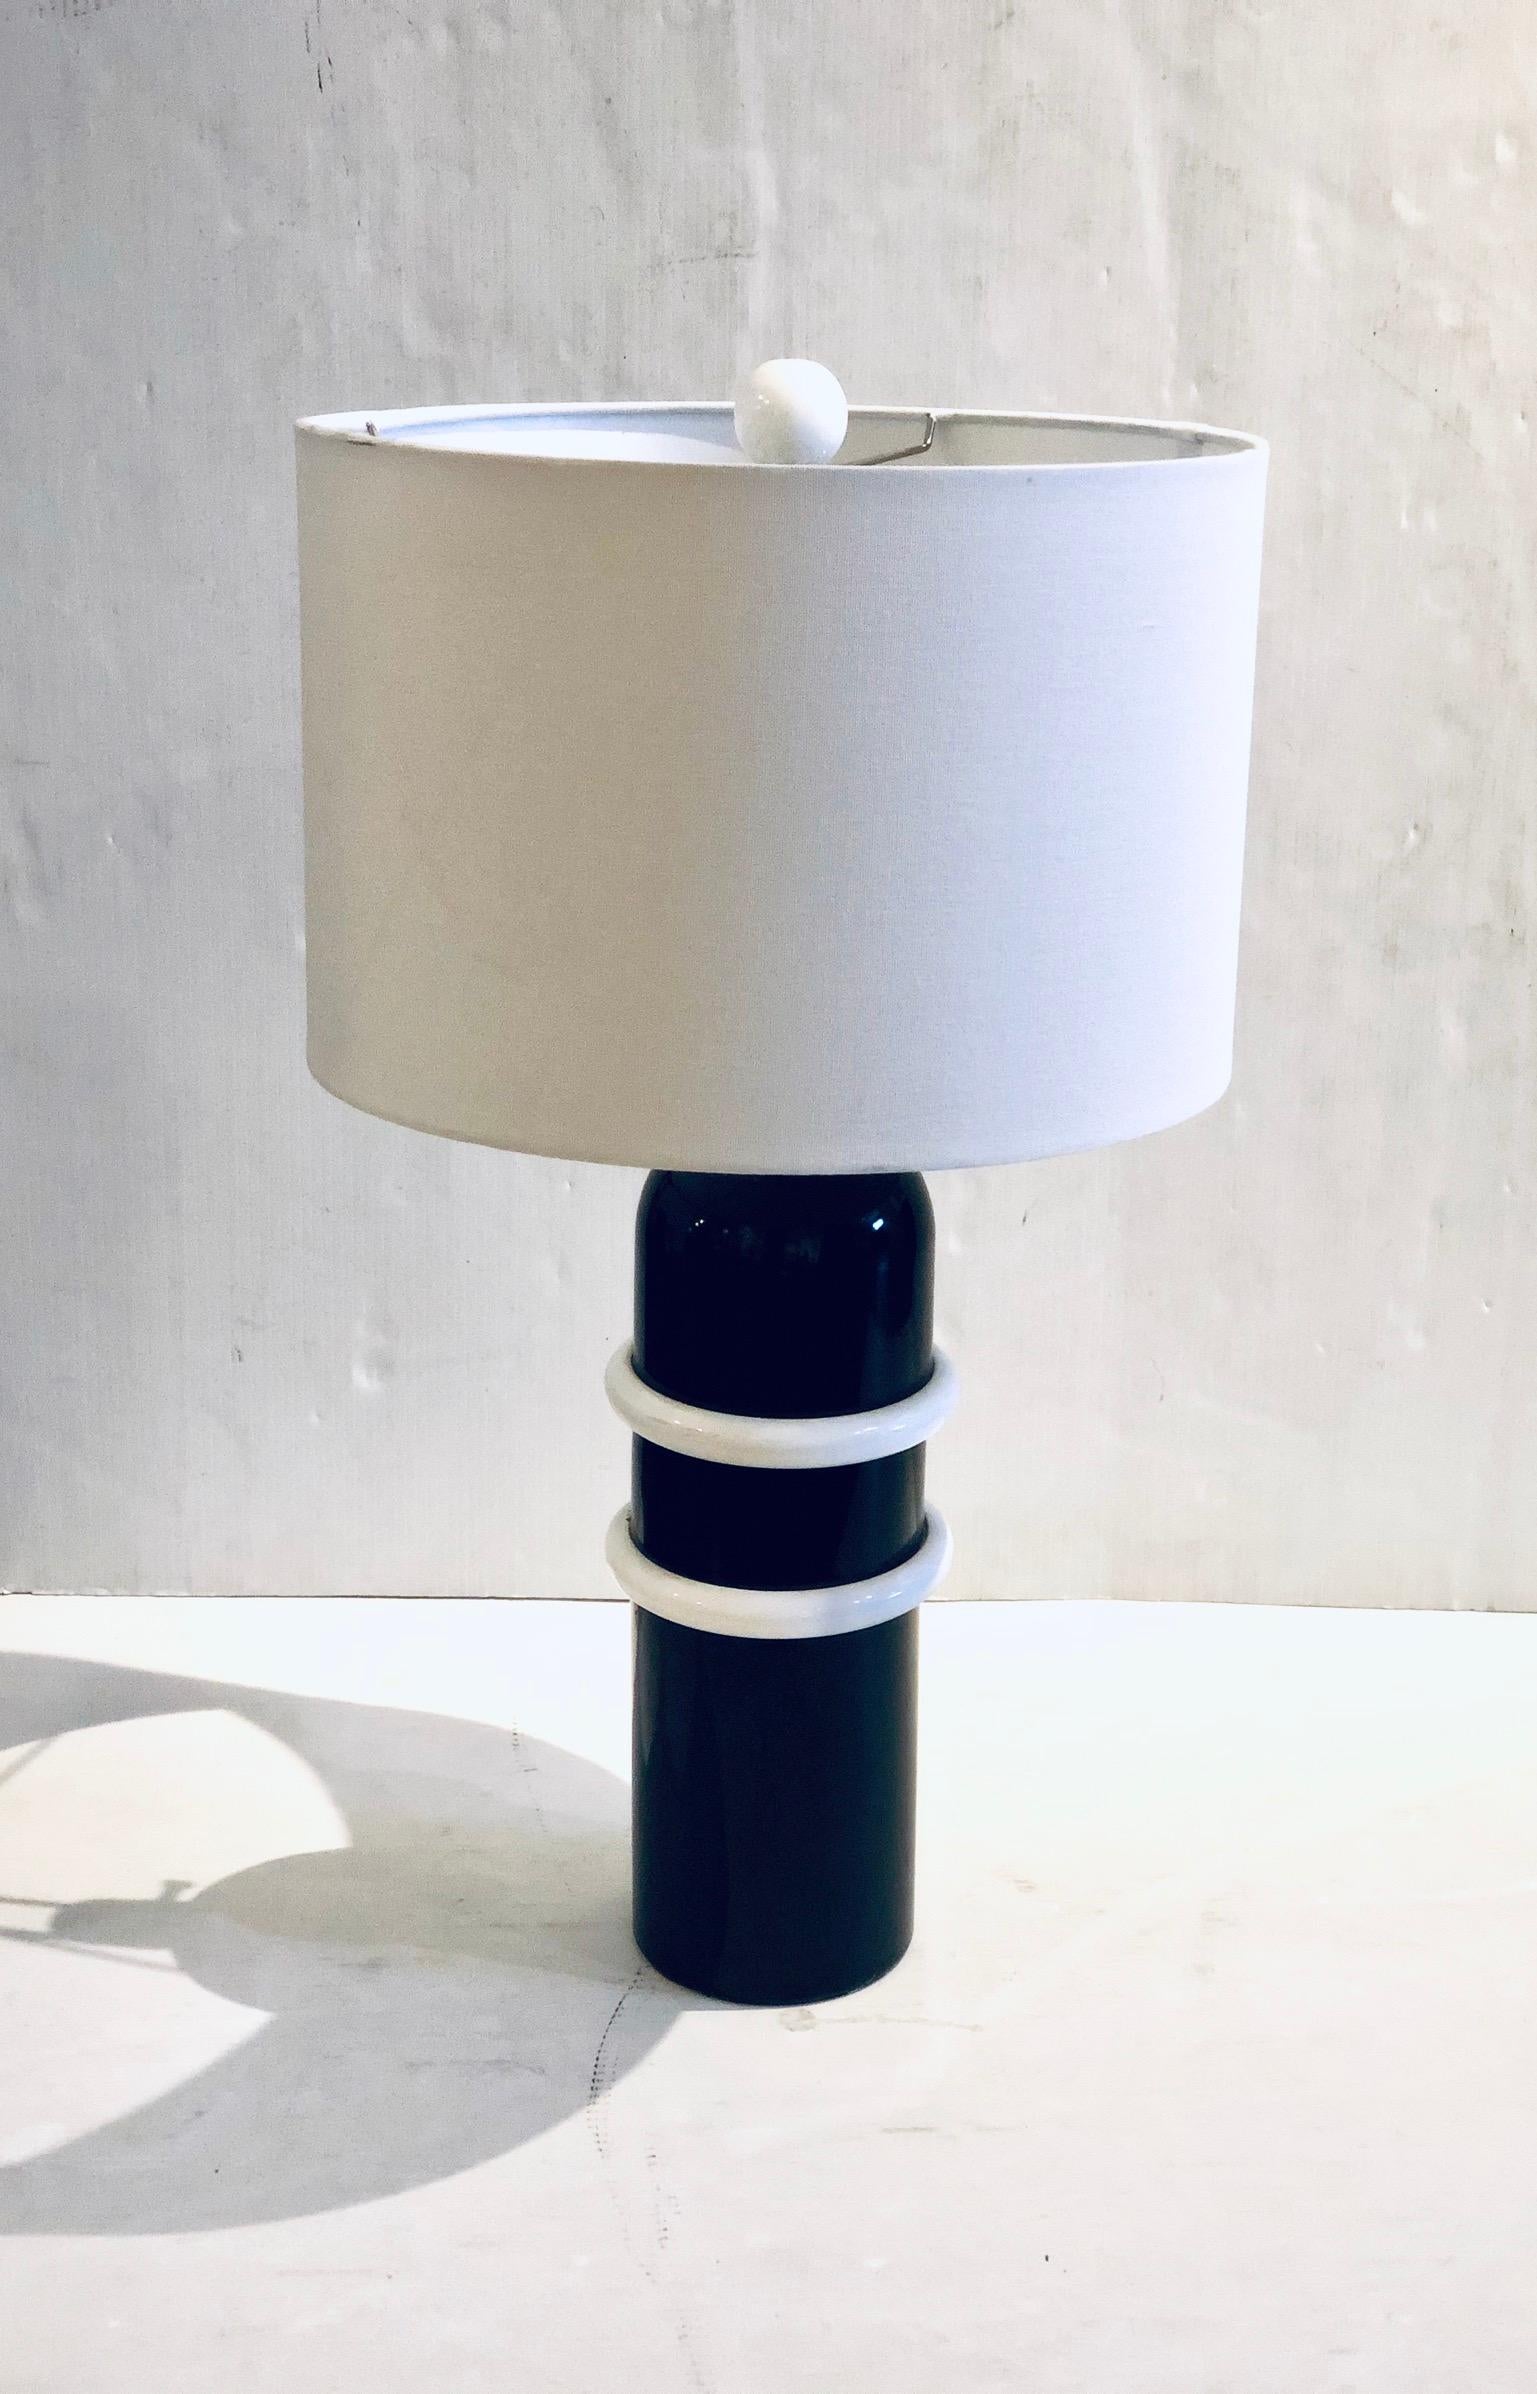 Beautiful elegant table lamp in black and white enameled finish accents, circa 1980s perfectly working with a cool white painted wood ball finial, lampshade is not included. The lamp its 28